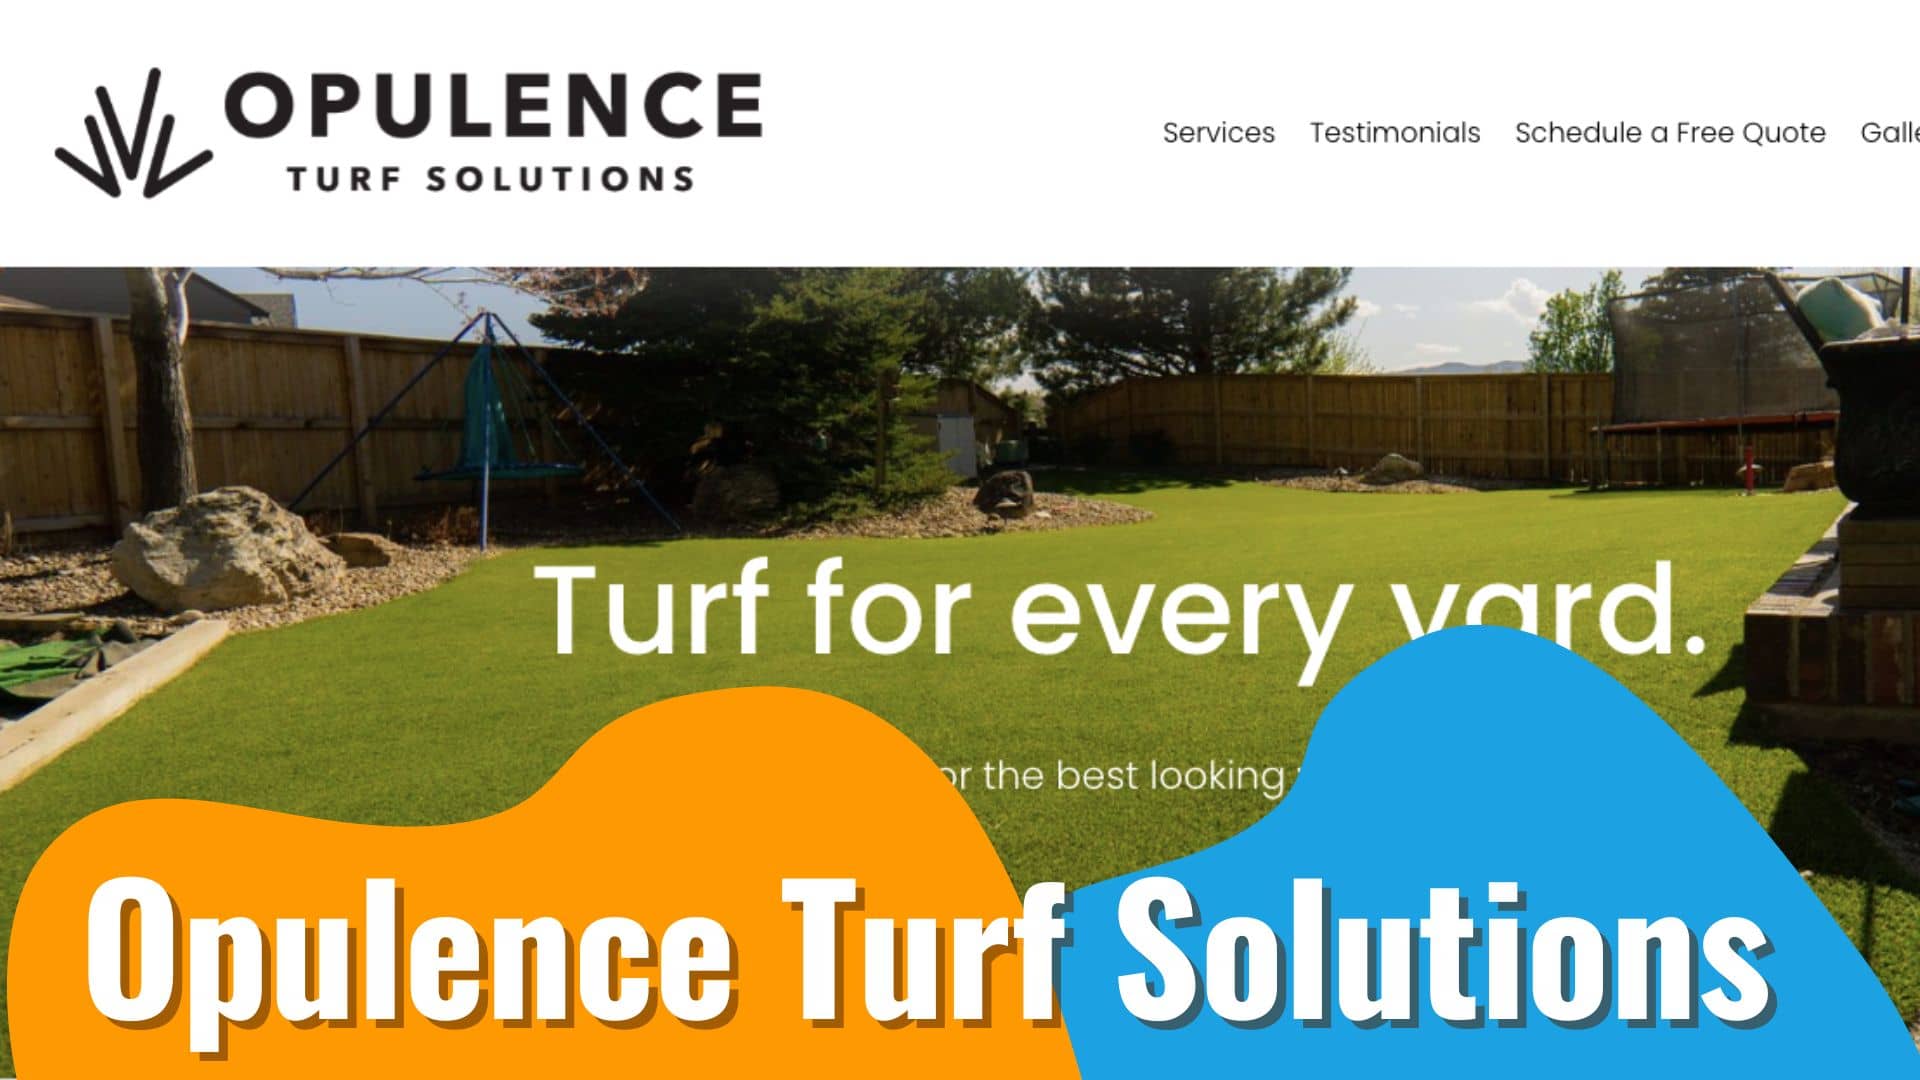 Opulence Turf Solutions